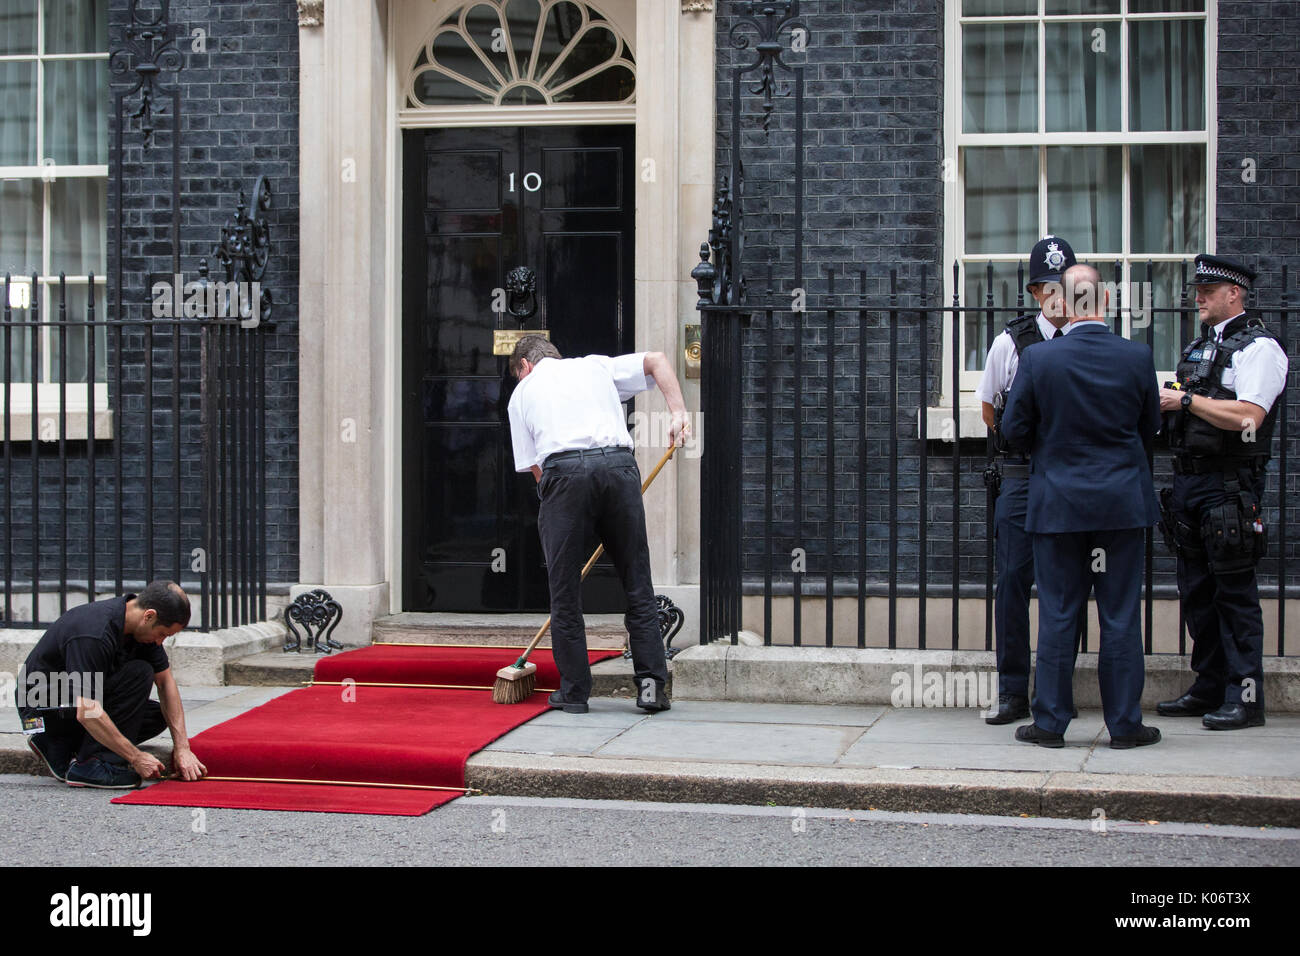 London, UK. 13th July, 2017. The red carpet is prepared outside 10 Downing Street before the arrival of King Felipe VI of Spain. Stock Photo